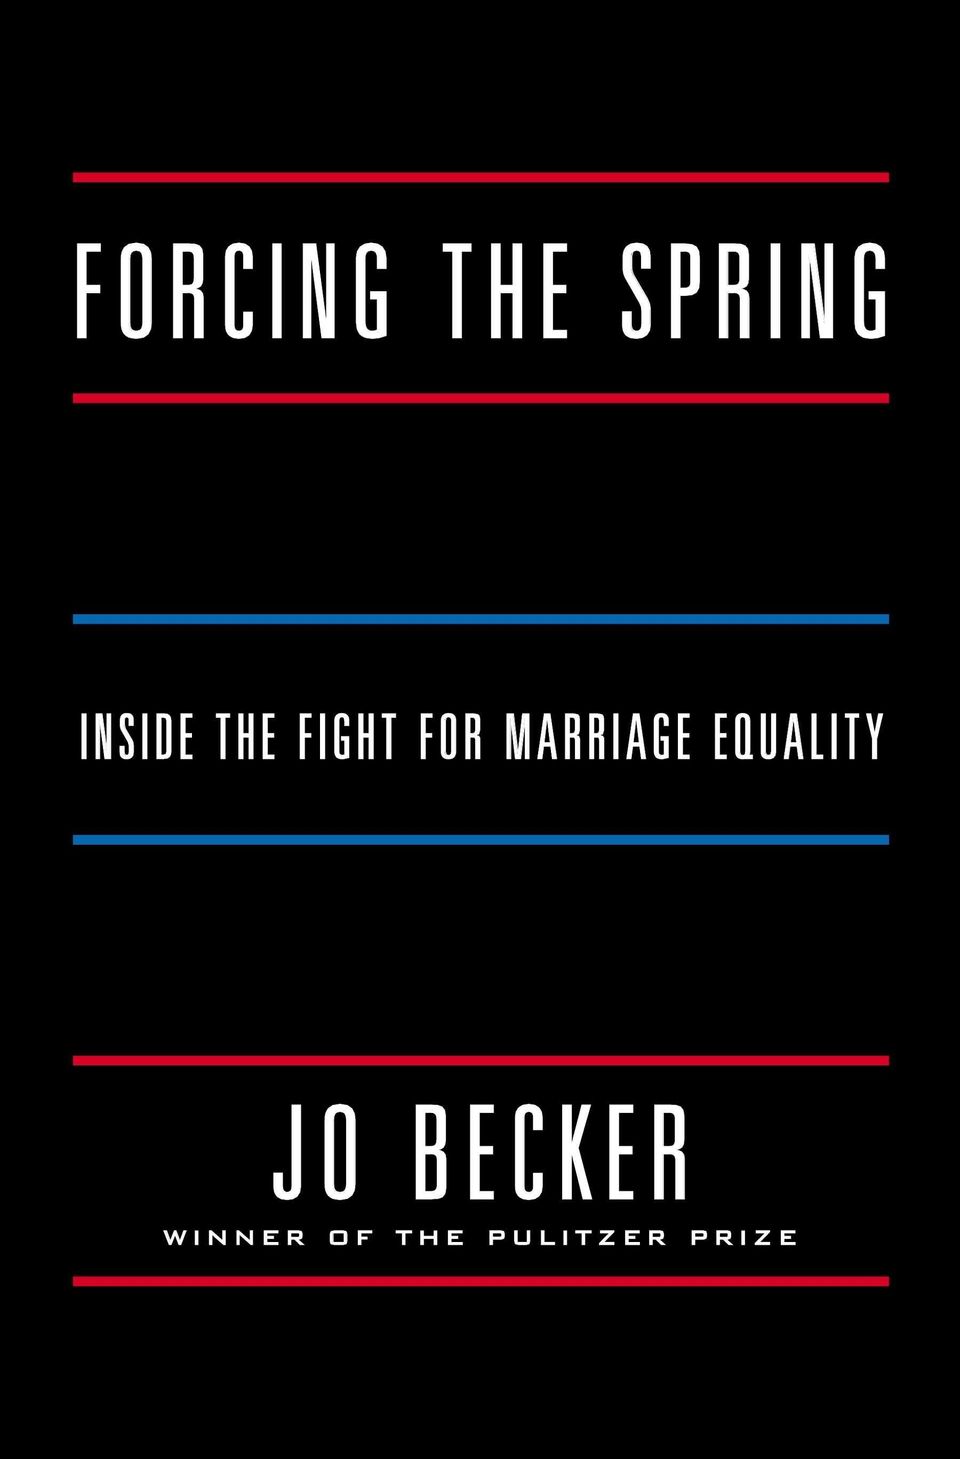 'Forcing the Spring: Inside the Fight for Marriage Equality' by Jo Becker (Penguin Press)